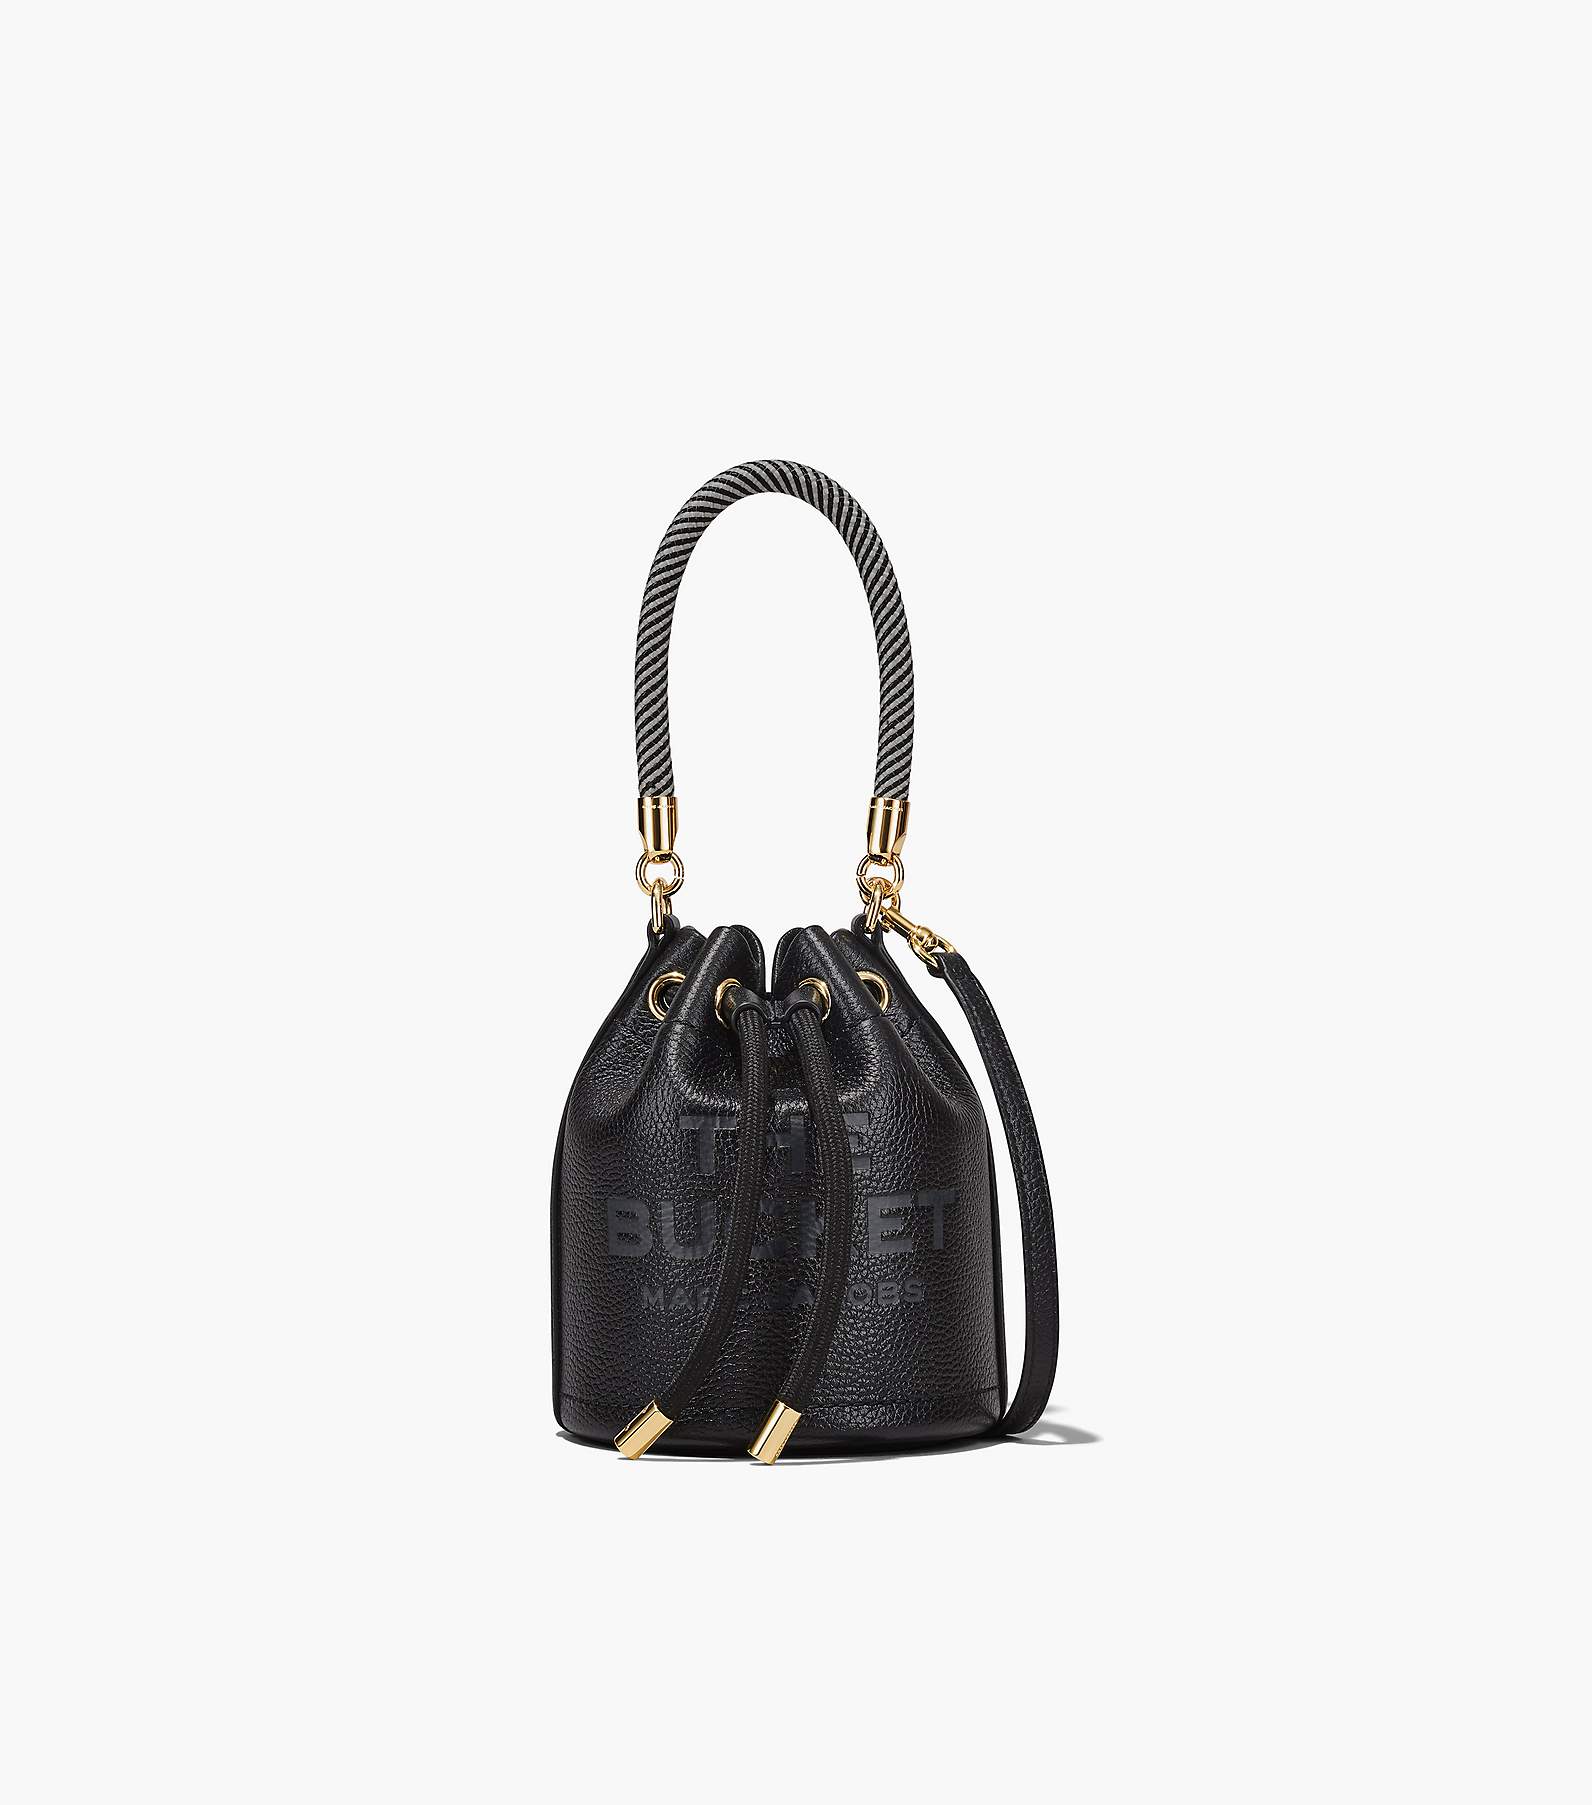 Louis Vuitton's Mini Monogram Bag Is Small In Size But Big On